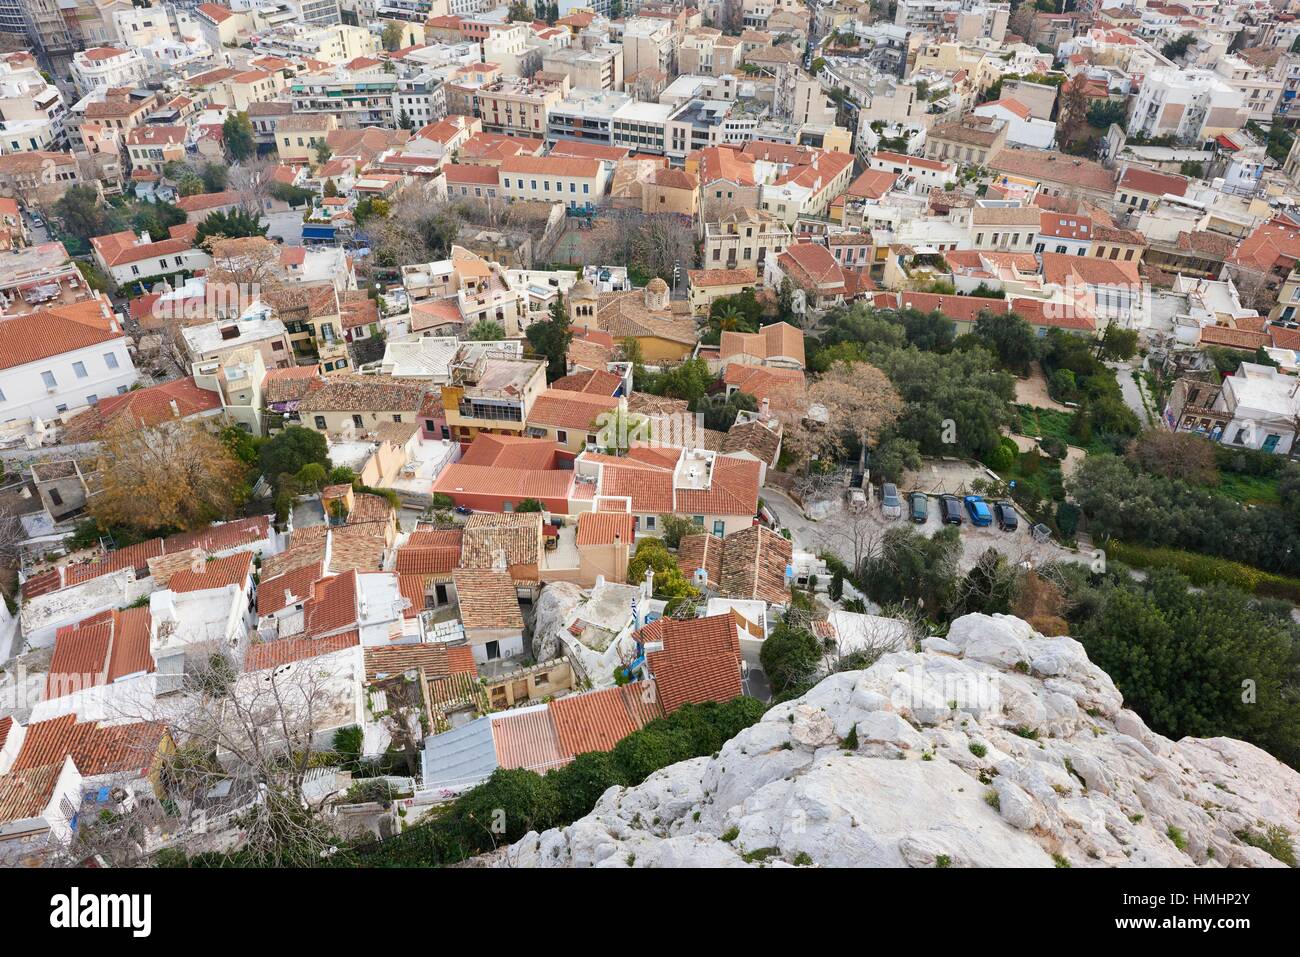 The districts of Plaka, Psirri and Exarchia seen from The Acropolis. Athens. Greece. Stock Photo